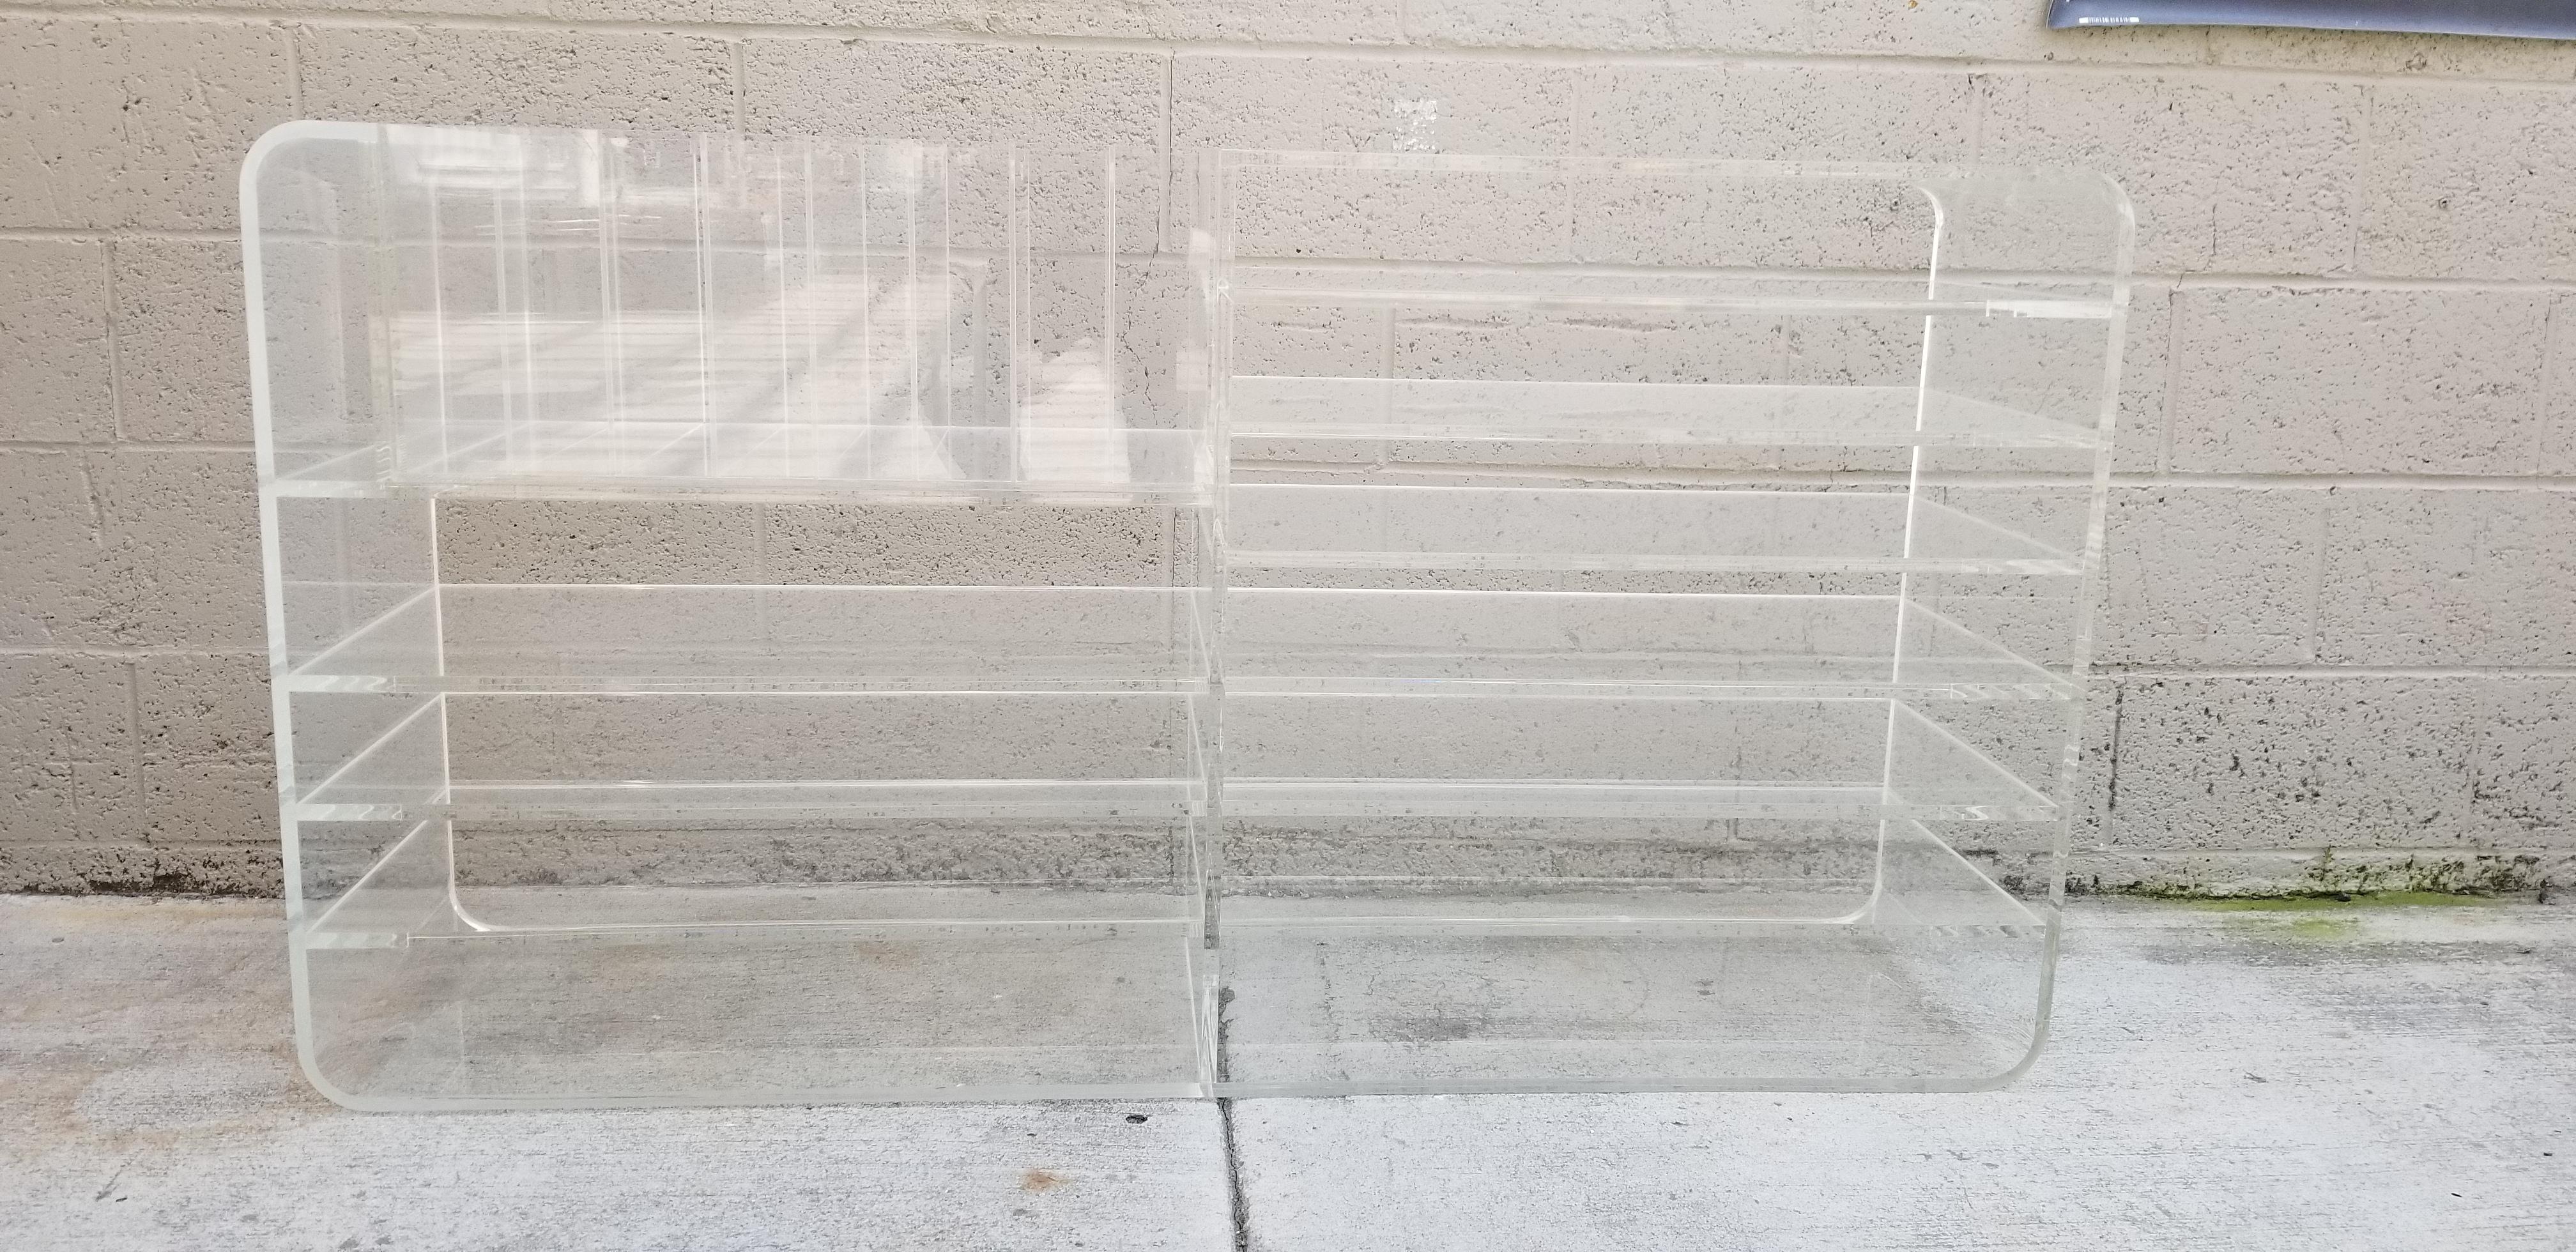 Unique Lucite or acrylic file organizer / storage unit with multiple shelves and removable file storage. Thick Lucite material with quality craftsmanship. Very good original condition with the usual scuffing and scratches found on vintage Lucite